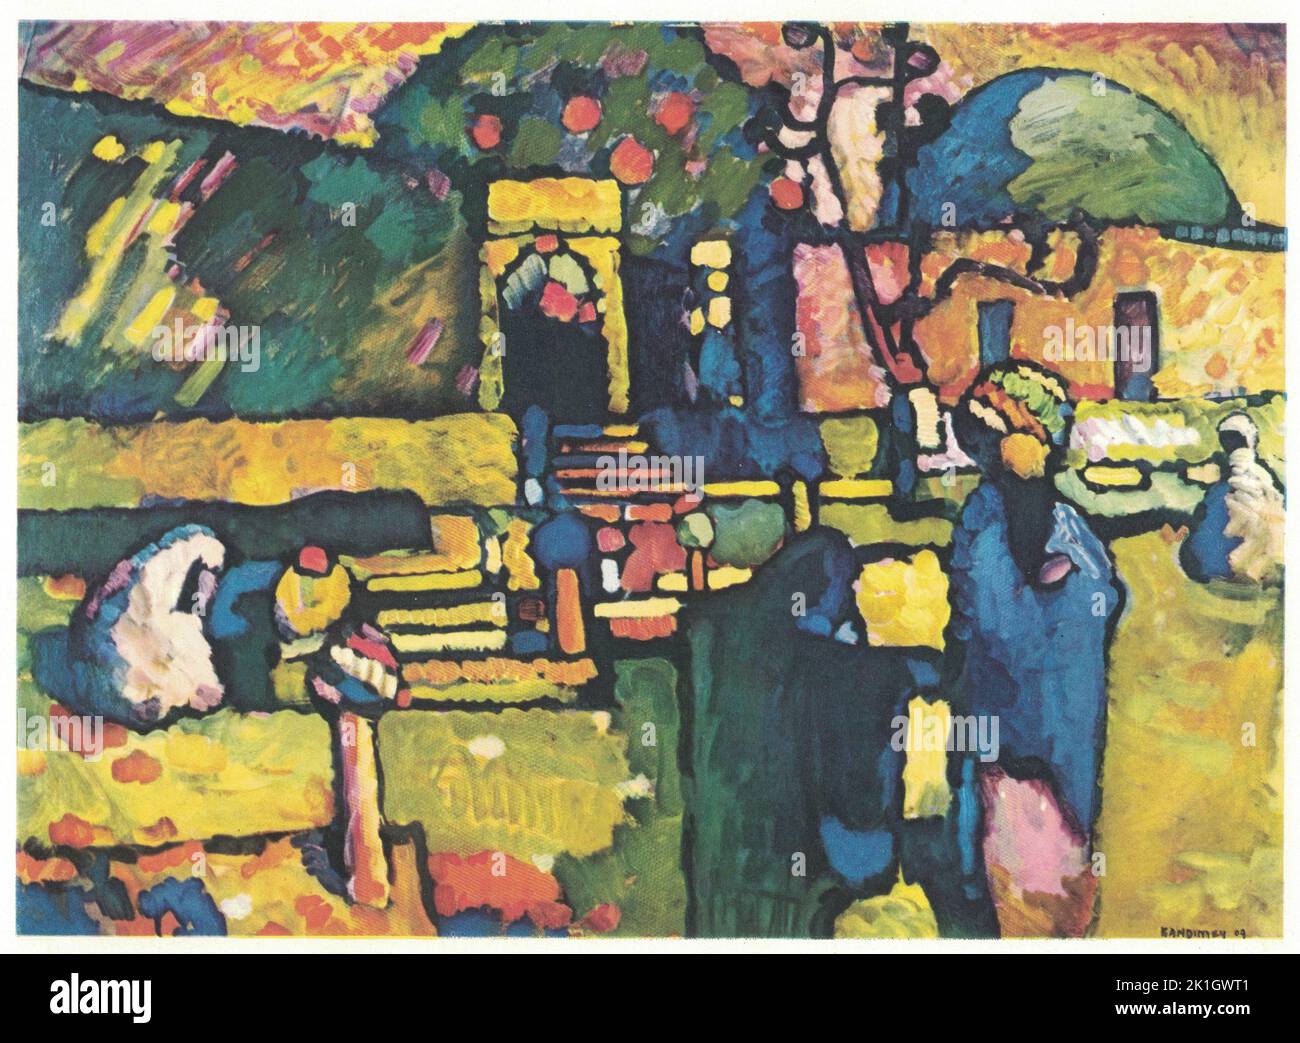 Arabs (Cemetery), 1909. Painting by Wassily Kandinsky.  Wassily Wassilyevich Kandinsky ( Russian: Василий Васильевич Кандинский,  Vasiliy Vasilyevich Kandinskiy), (16 December 1866 – 13 December 1944) was a Russian painter and art theorist. Kandinsky is generally credited as one of the pioneers of abstraction in western art, possibly after Hilma af Klint. Born in Moscow, he spent his childhood in Odesa, where he graduated at Grekov Odesa Art school. He enrolled at the University of Moscow, studying law and economics. Successful in his profession—he was offered a professorship. Stock Photo